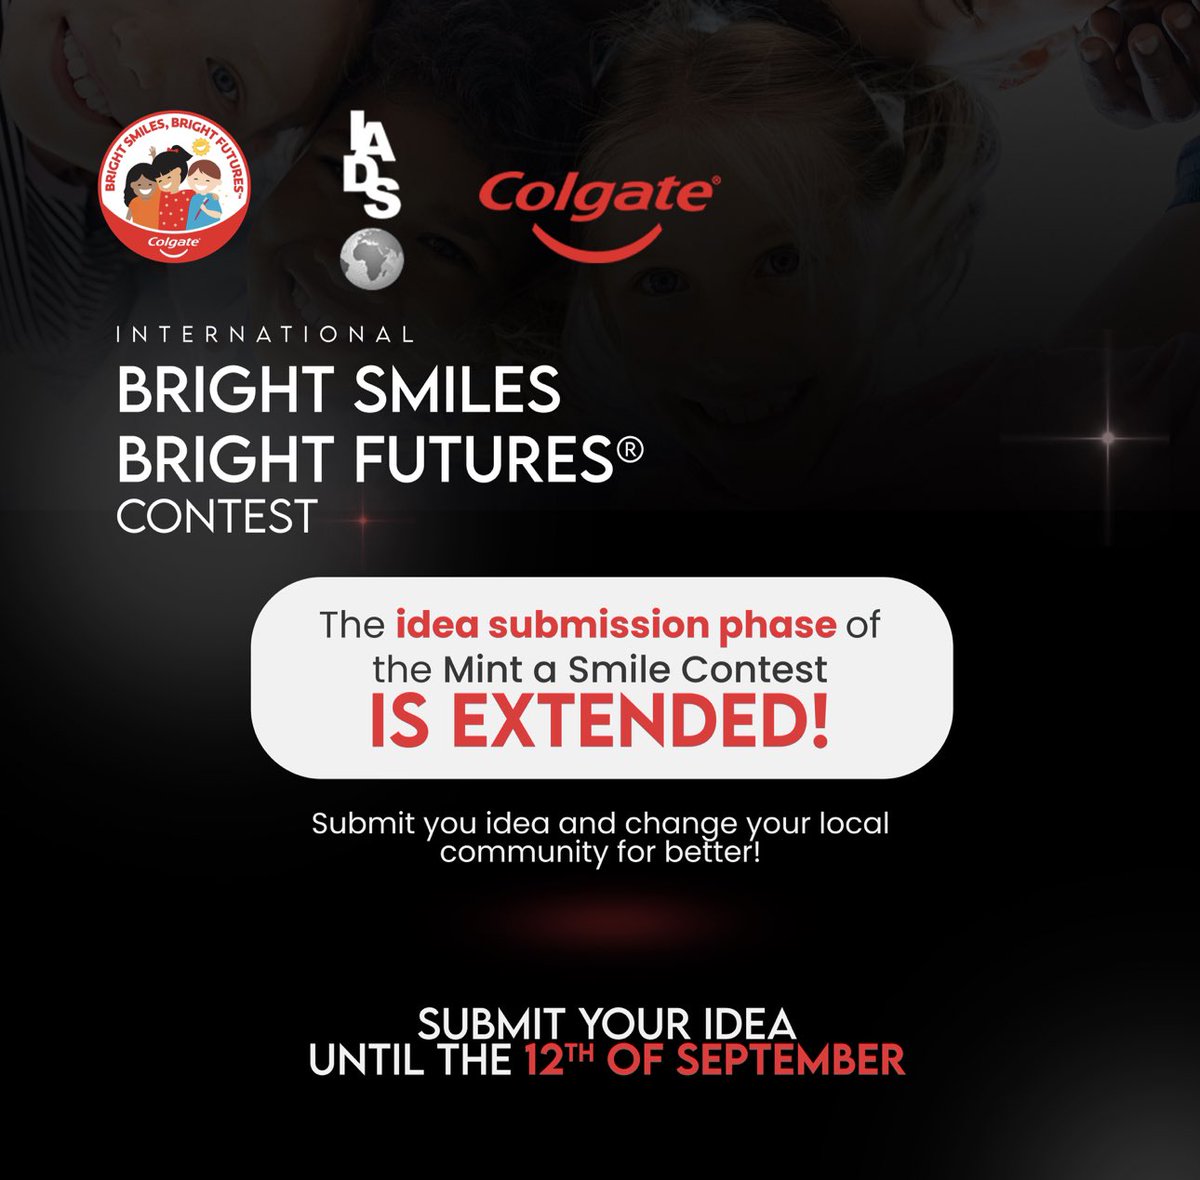 We are very glad you expressed great interest, that is why we are extending the idea submission phase until the 12th of September! Gather your team and make your local community better! iads-web.com/projects/colga… #colgate #future #oralhealth #healthcare